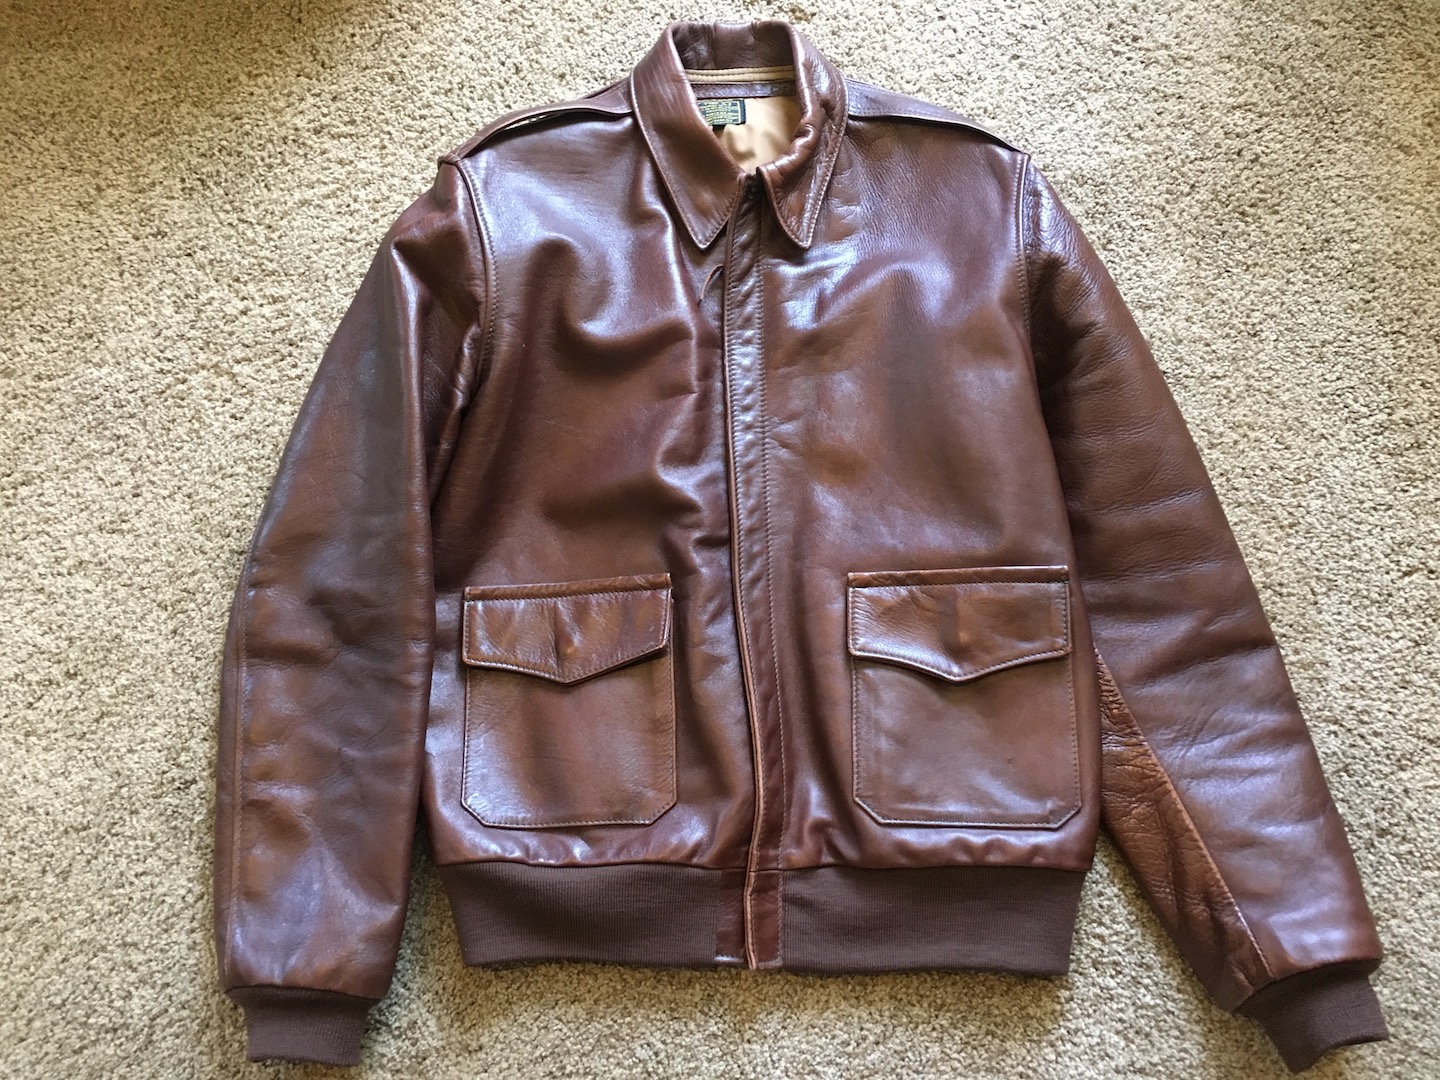 Spring Cleaning Part 3 Aero A-2 Bronco Russet Horsehide 44 | The Fedora ...